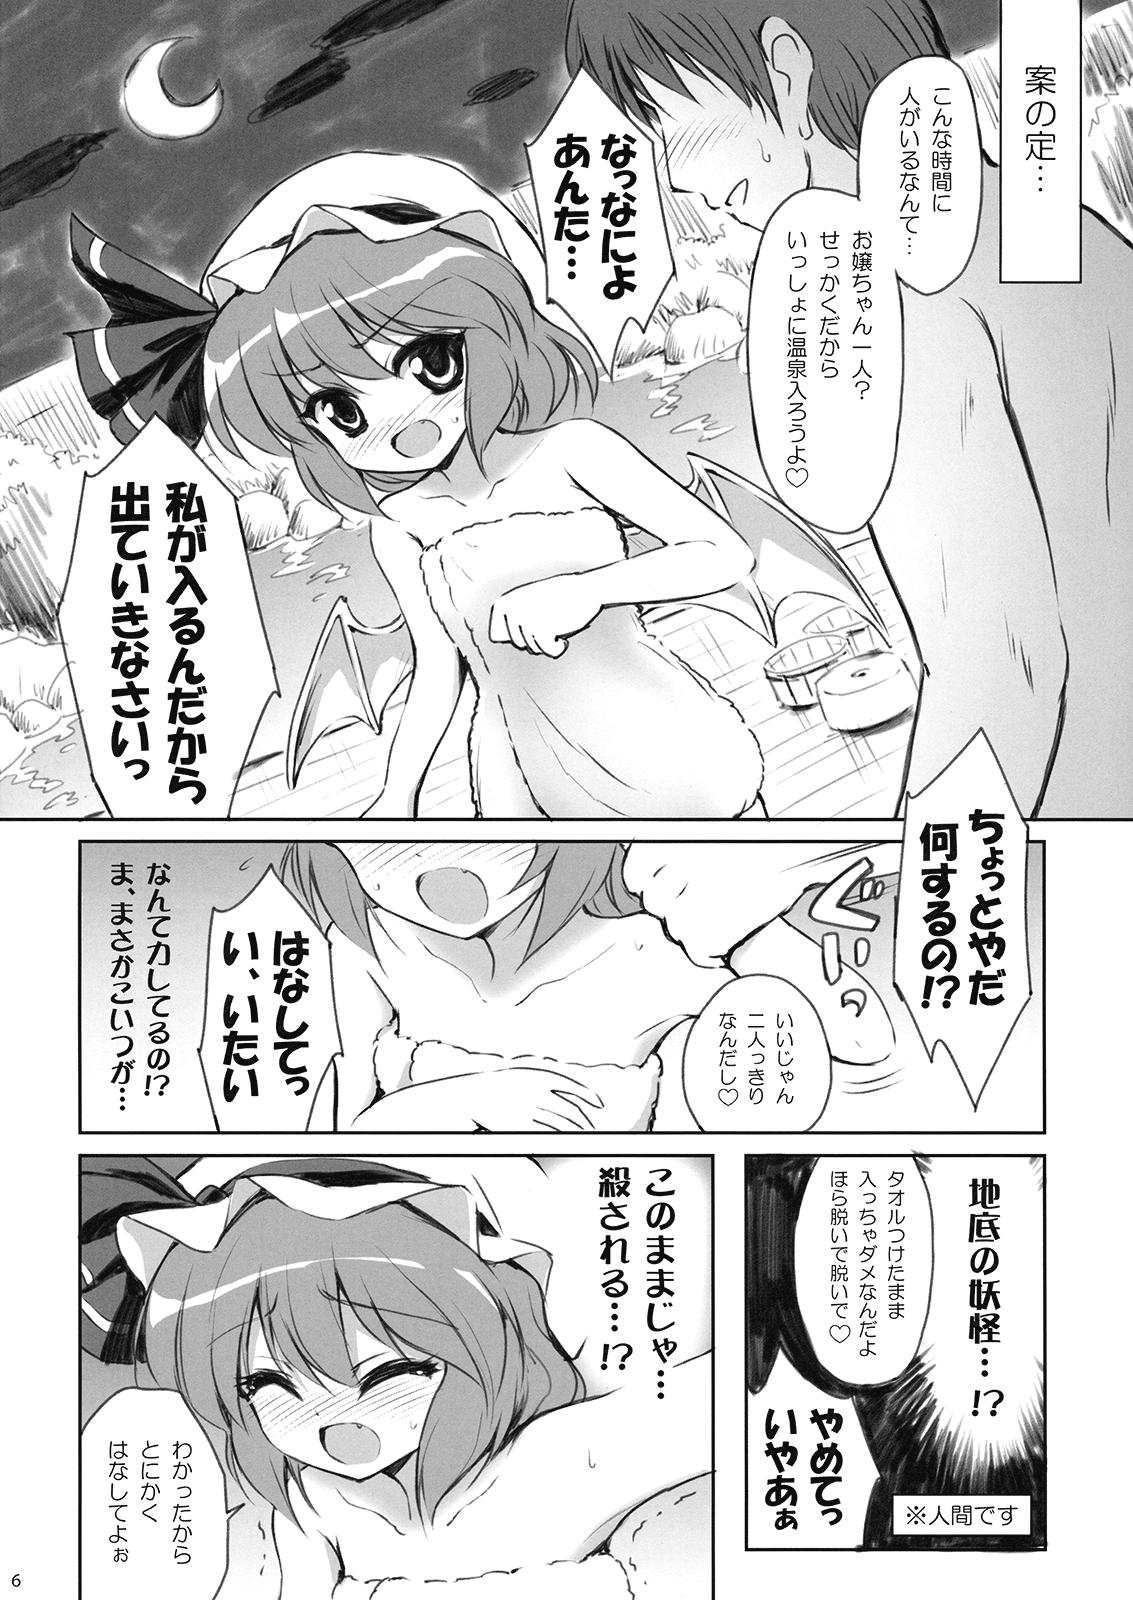 Cream Pie CHILD DRAGON - Touhou project Creampies - Page 6